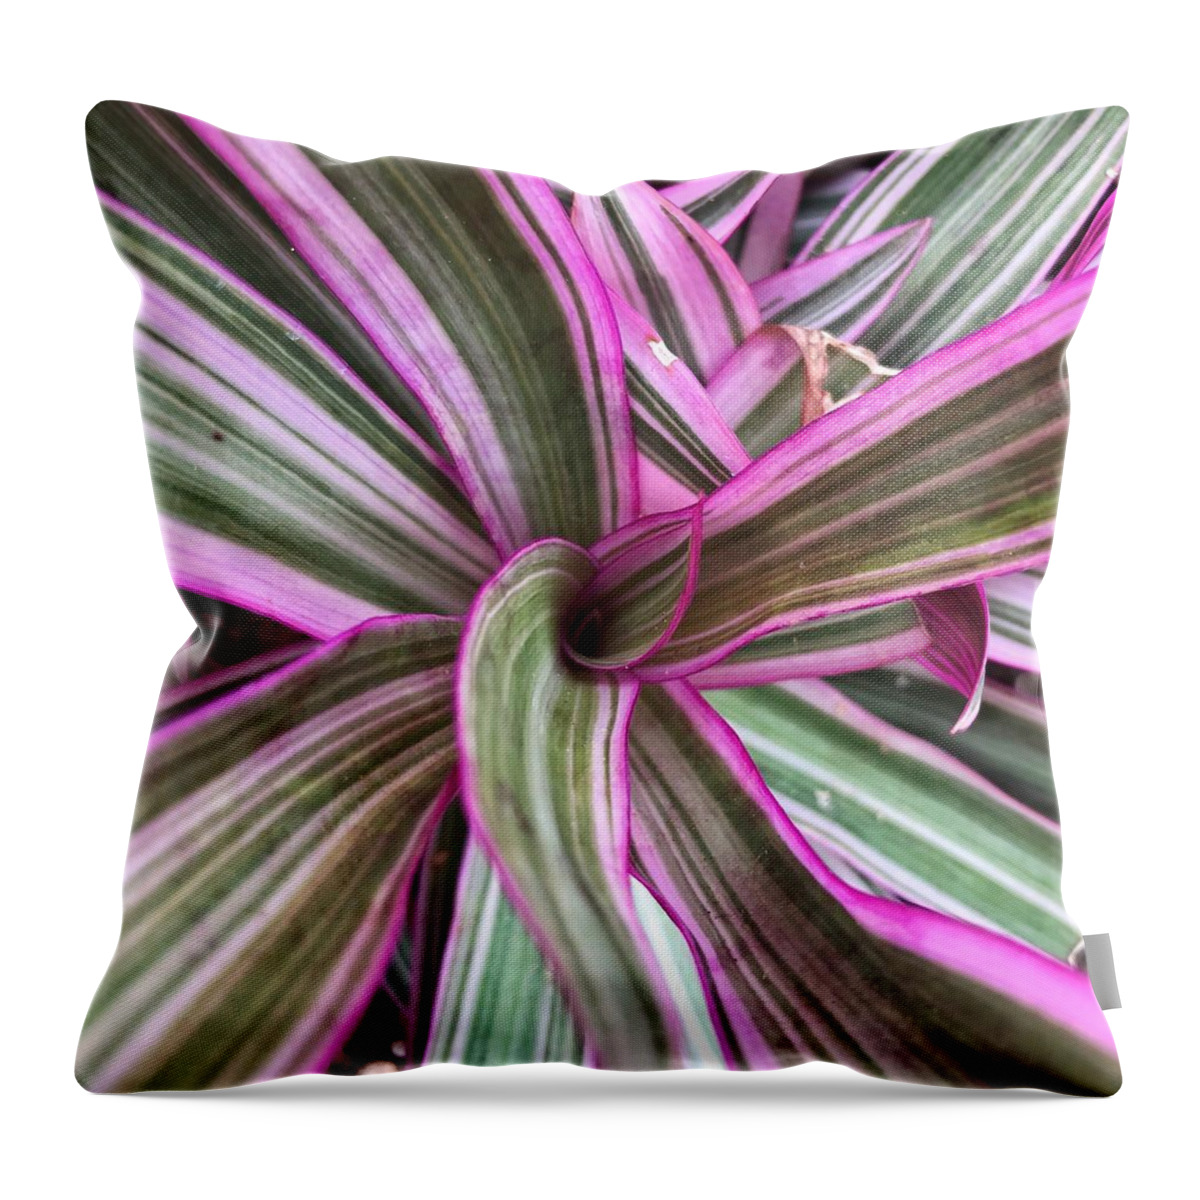 Boat Lily Throw Pillow featuring the photograph Boat Lily by Jori Reijonen